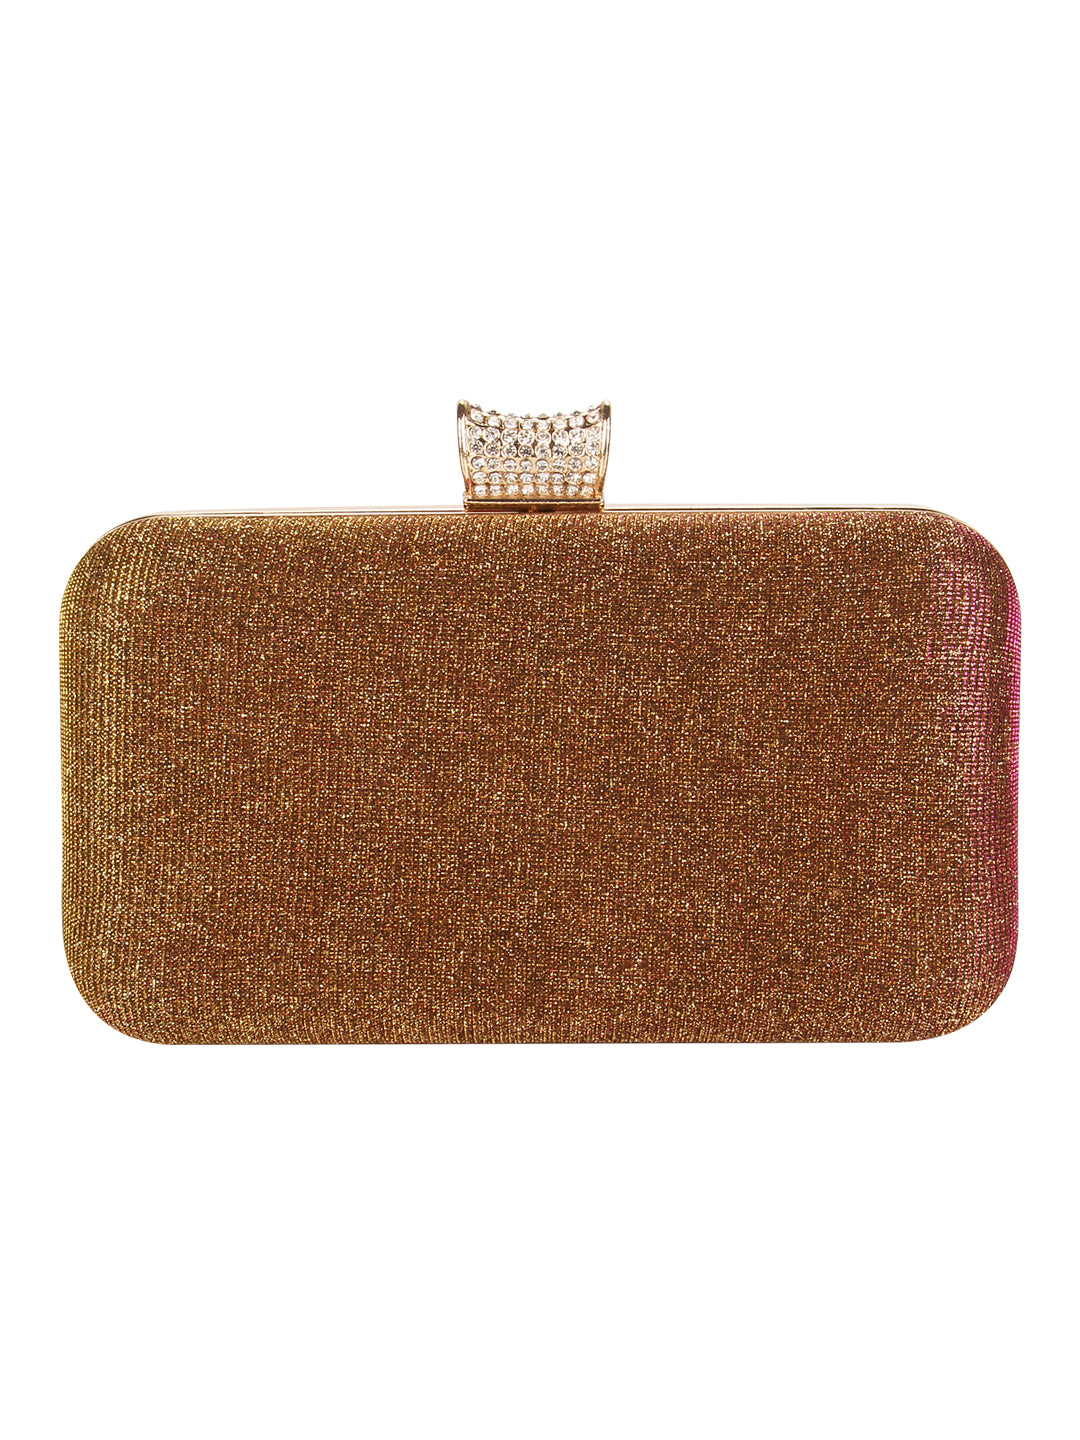 Vdesi India's gold clutch is perfect for a formal event. 